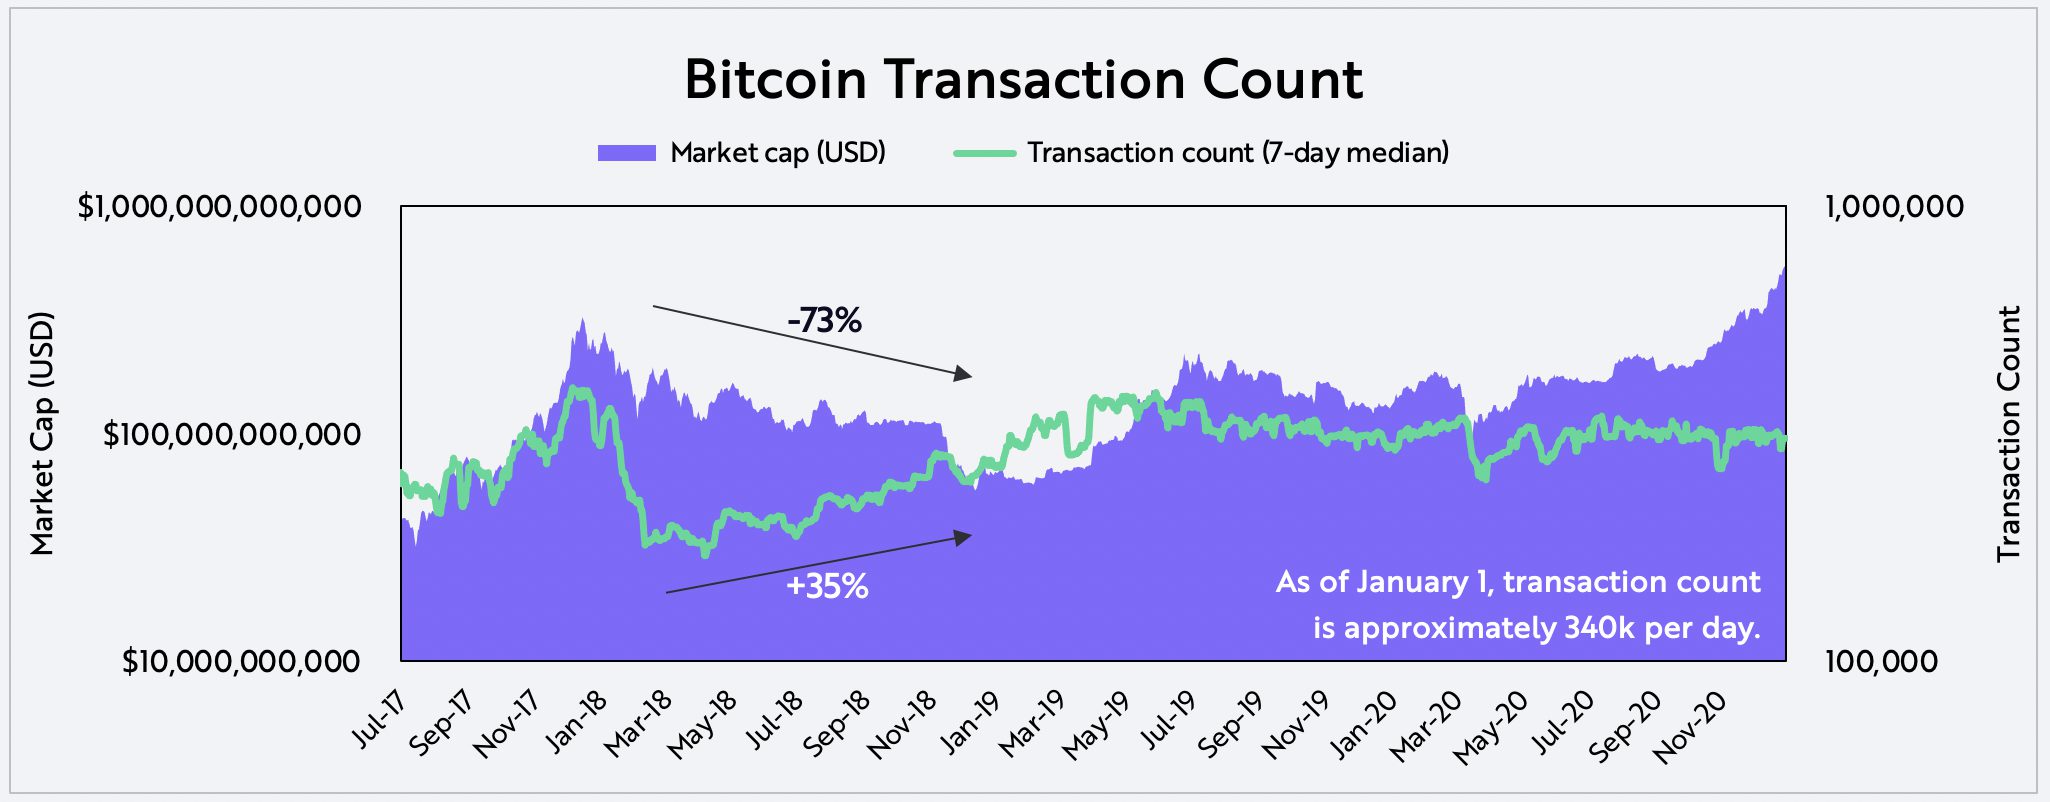 Evaluating Bitcoin Transaction Count on-chain data